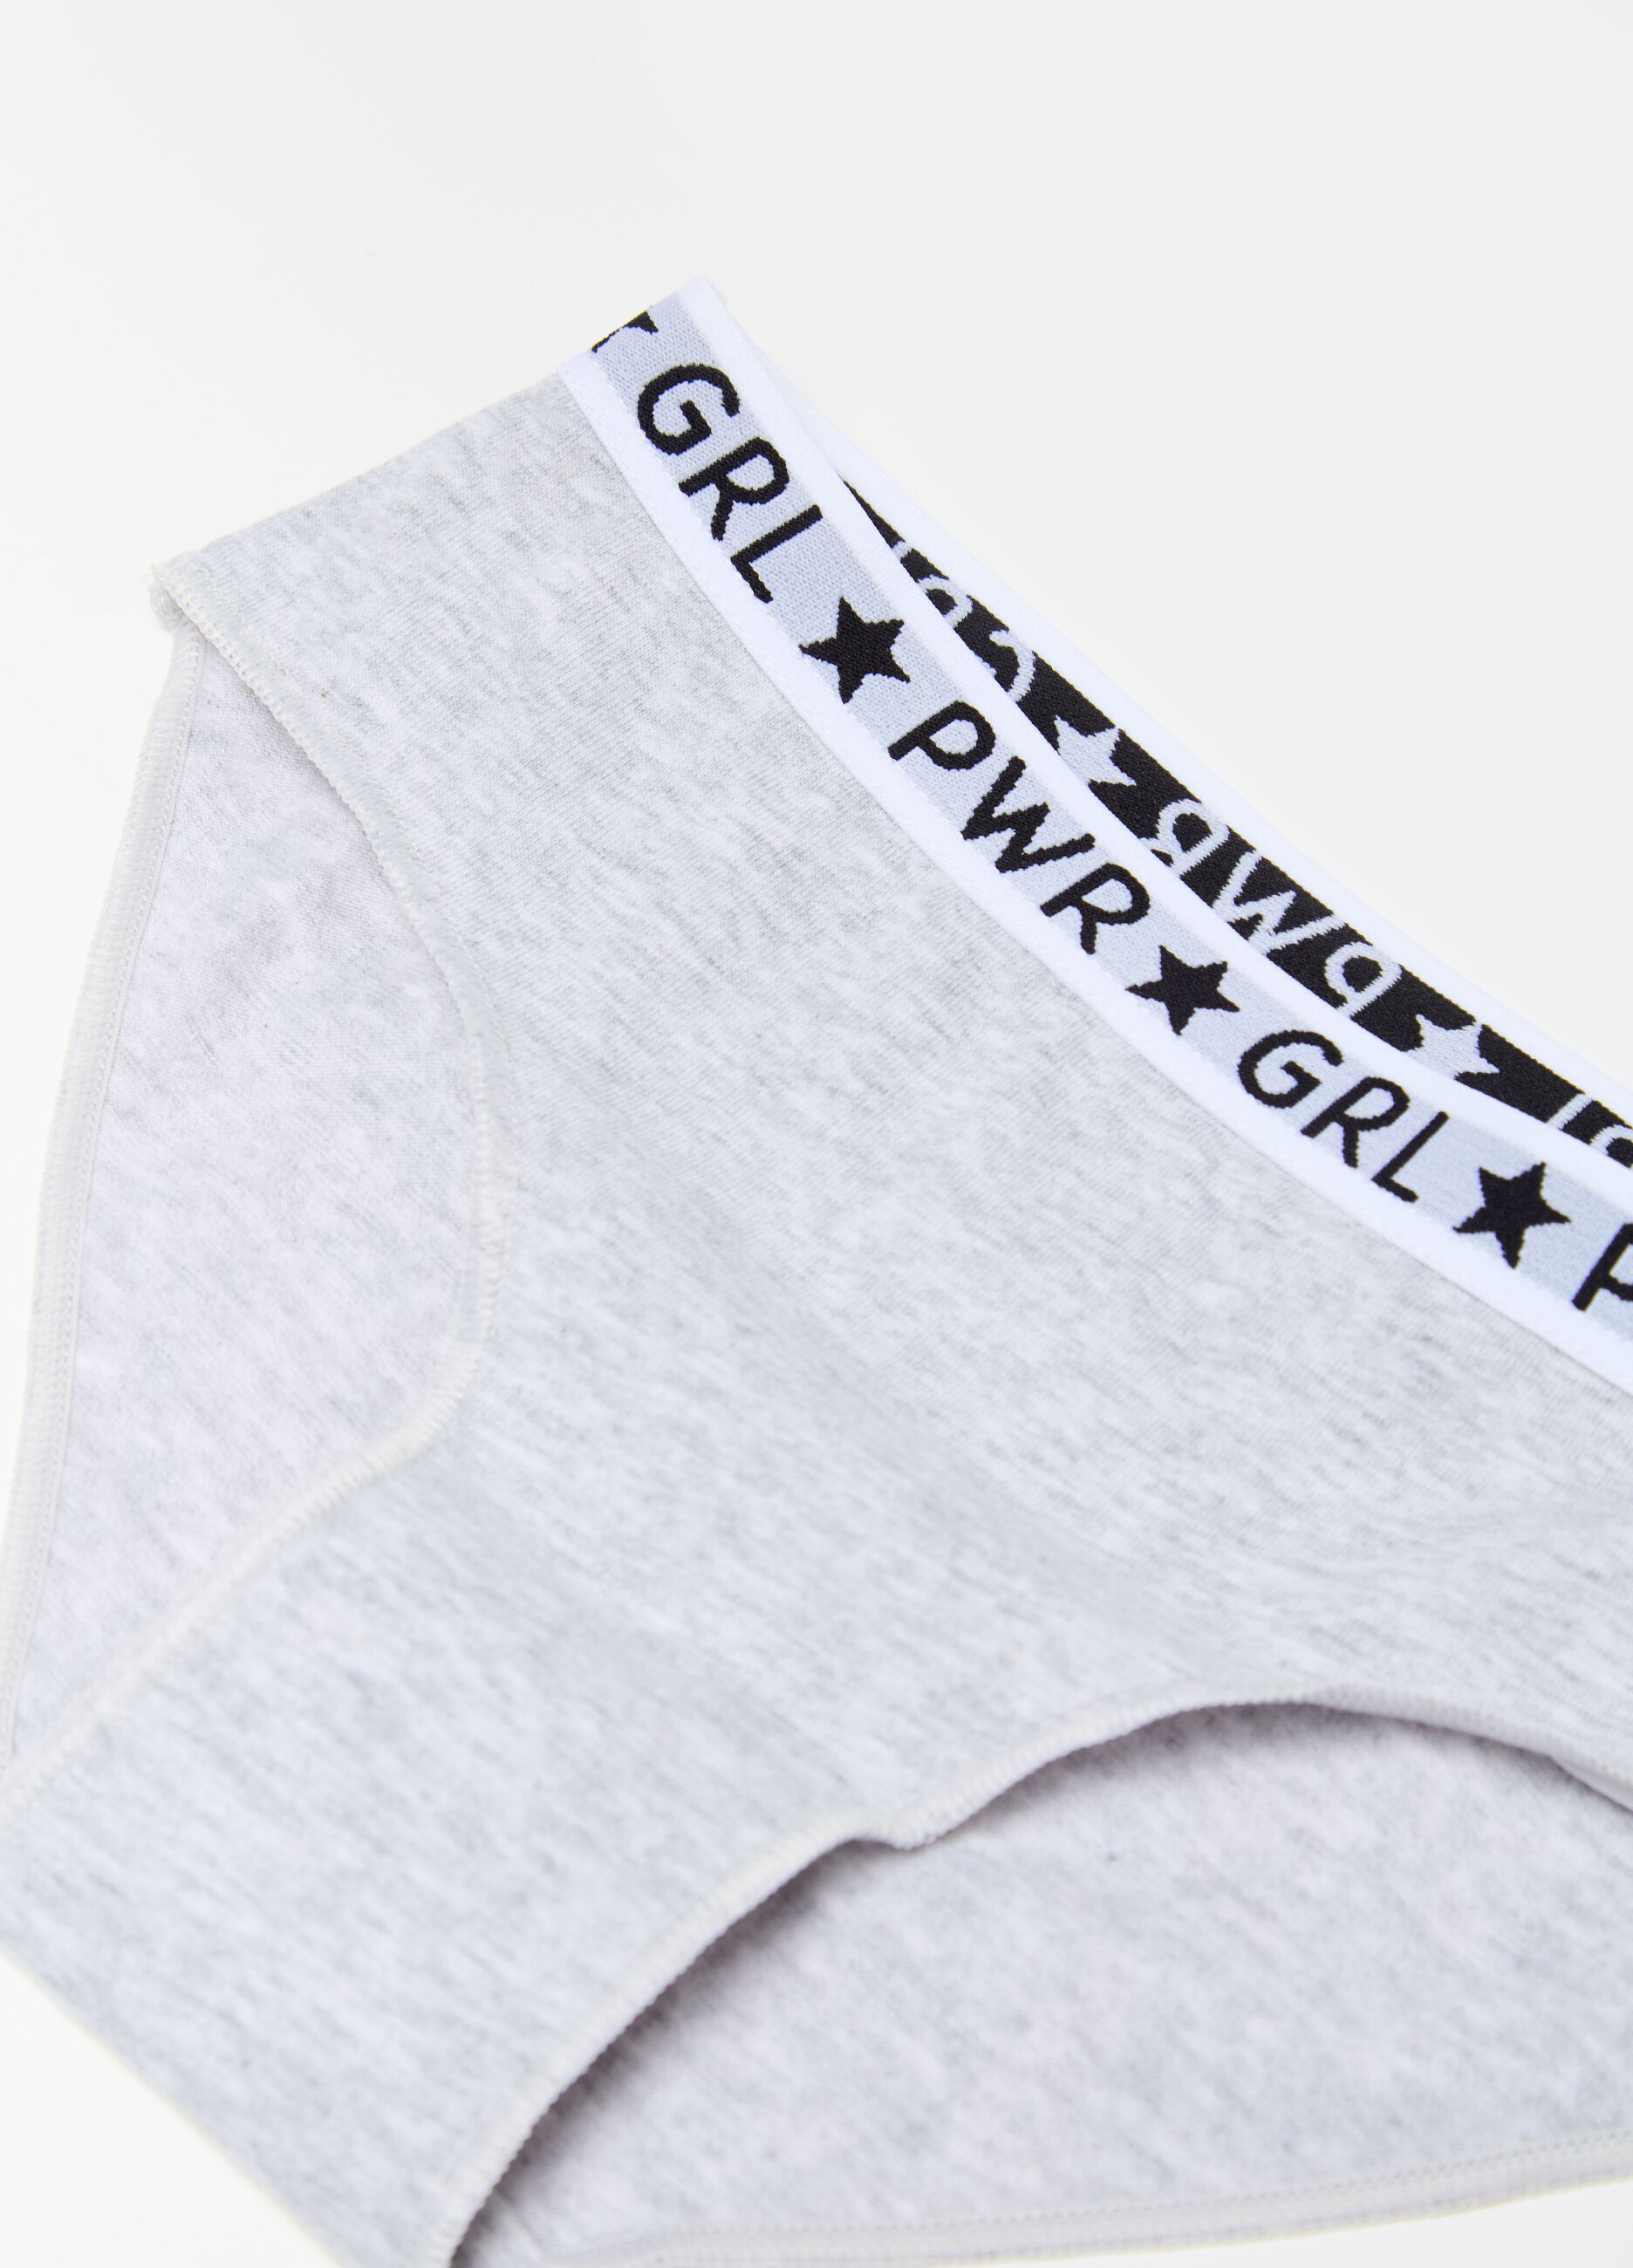 Organic cotton briefs with lettering